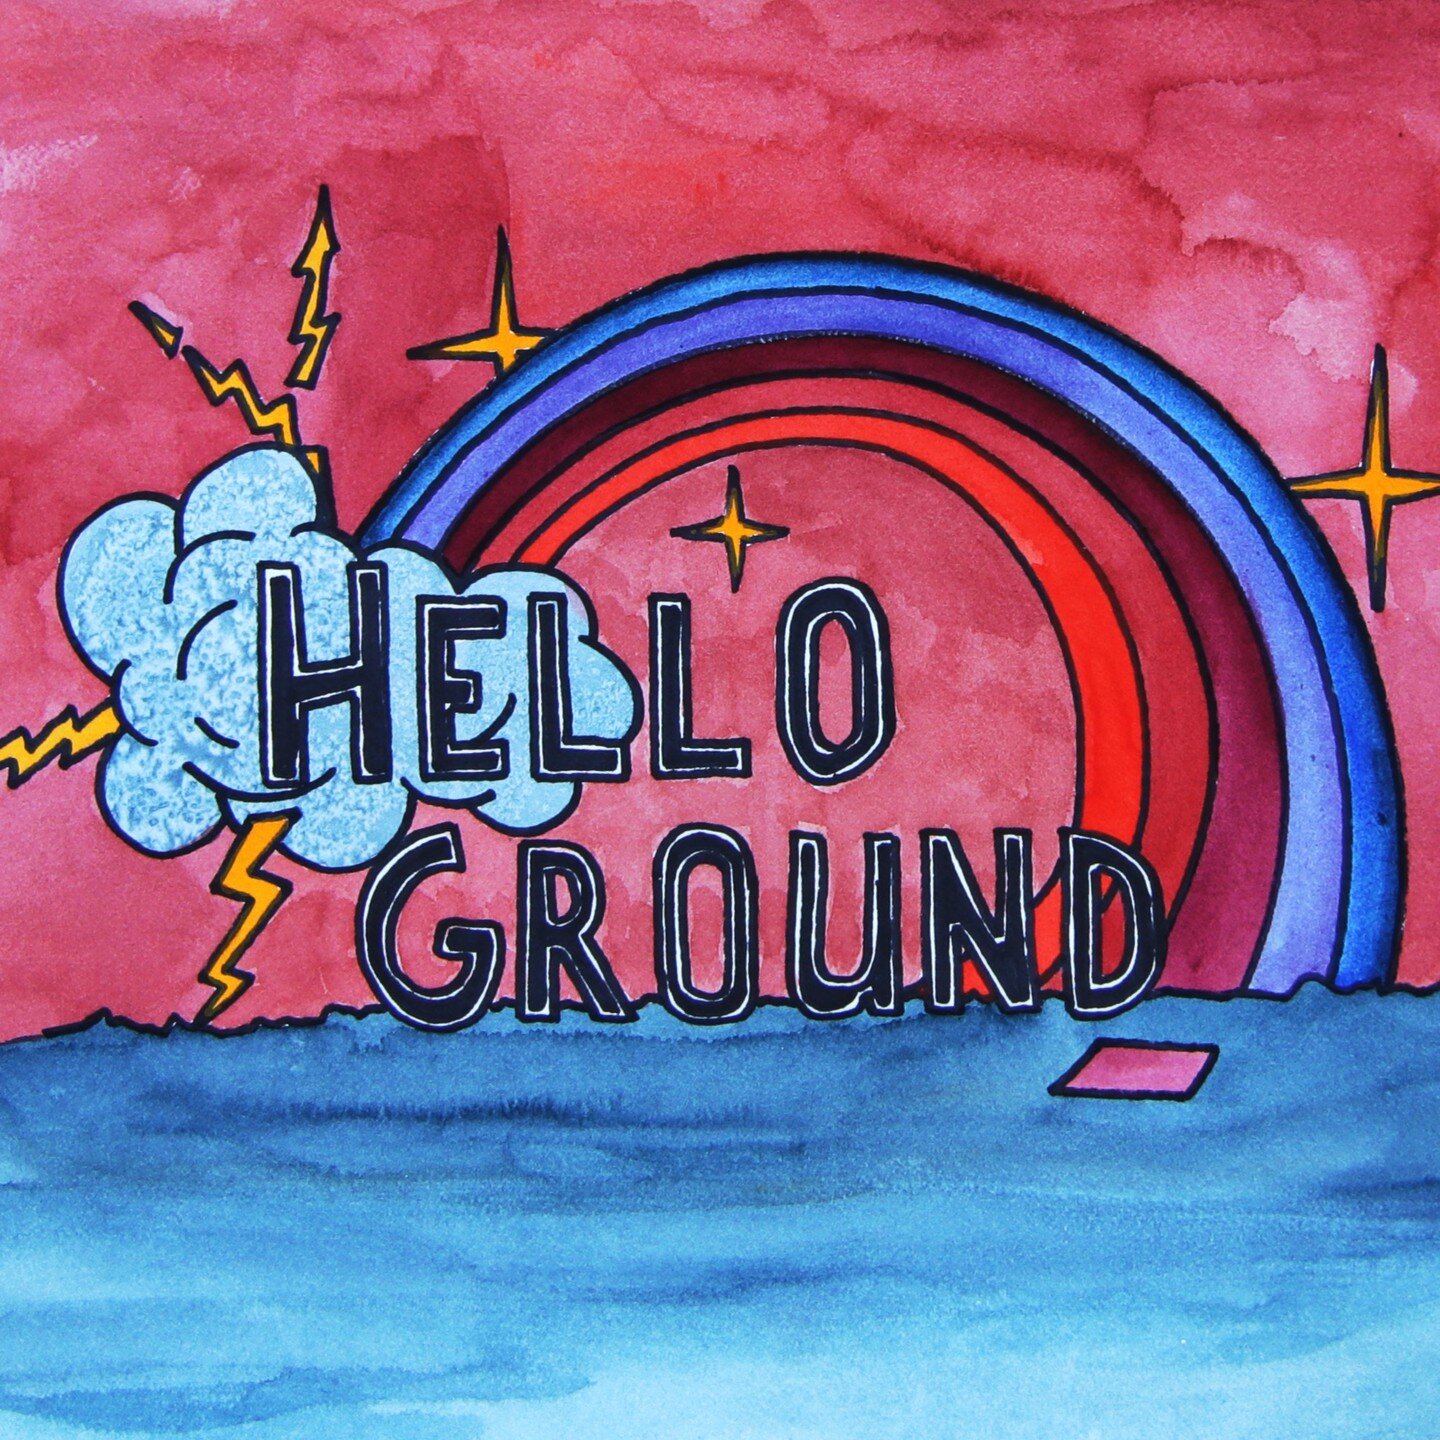 An old painting courtesy of our art person, Chris Dailey. Of course we have a new song, video and more coming on Friday.

#newmusic #newsong #originalart #chrisdailey #Helloground #slowdown #indierock #indiepopmusic